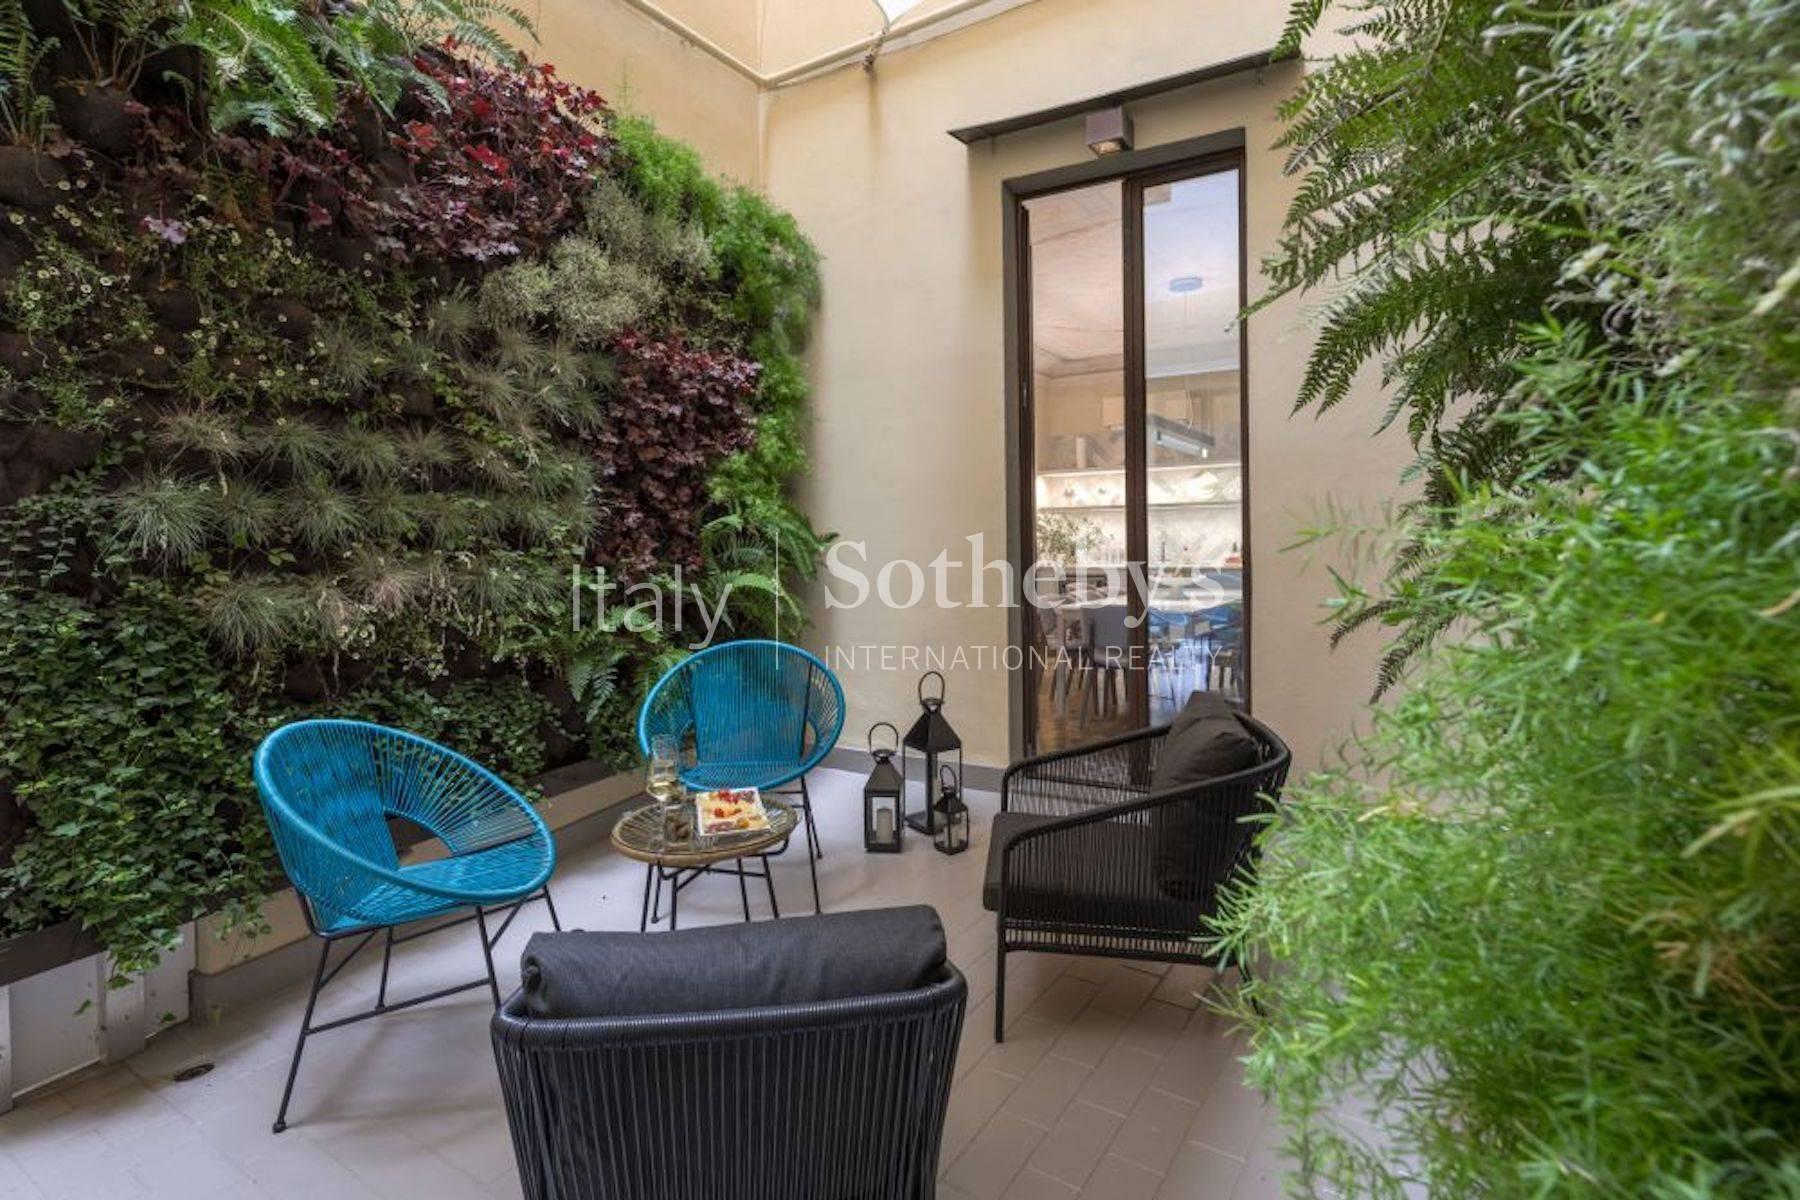 Mona Lisa apartment with courtyard in the heart of Florence - 2